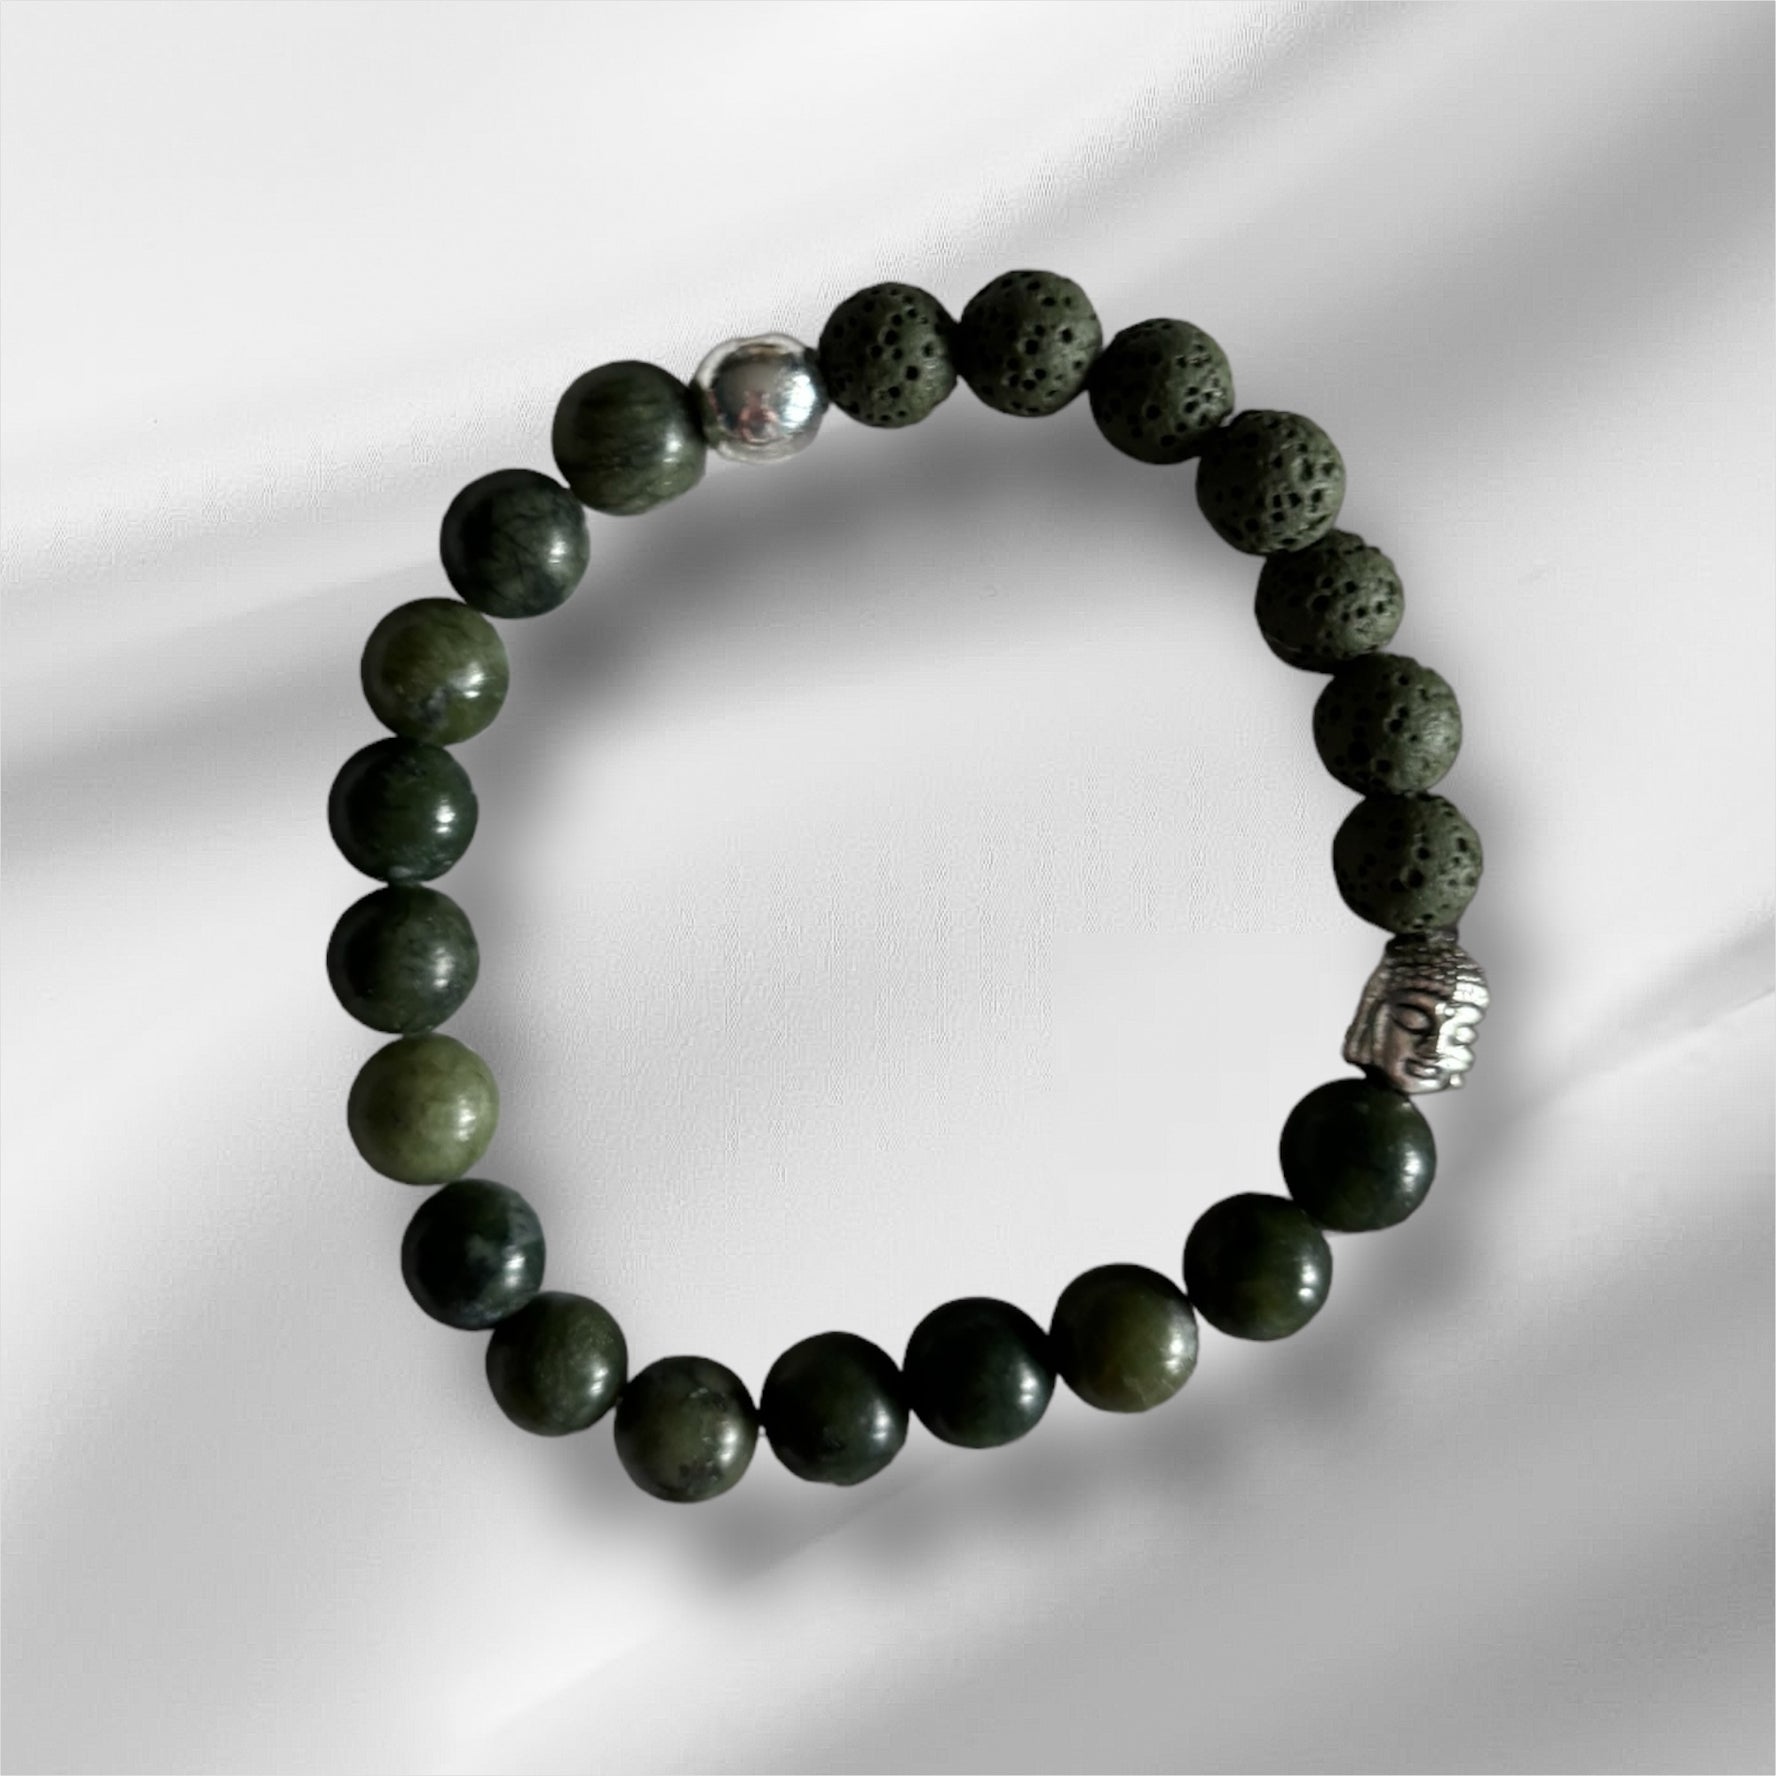 Handcrafted bracelet from the “Jade” collection